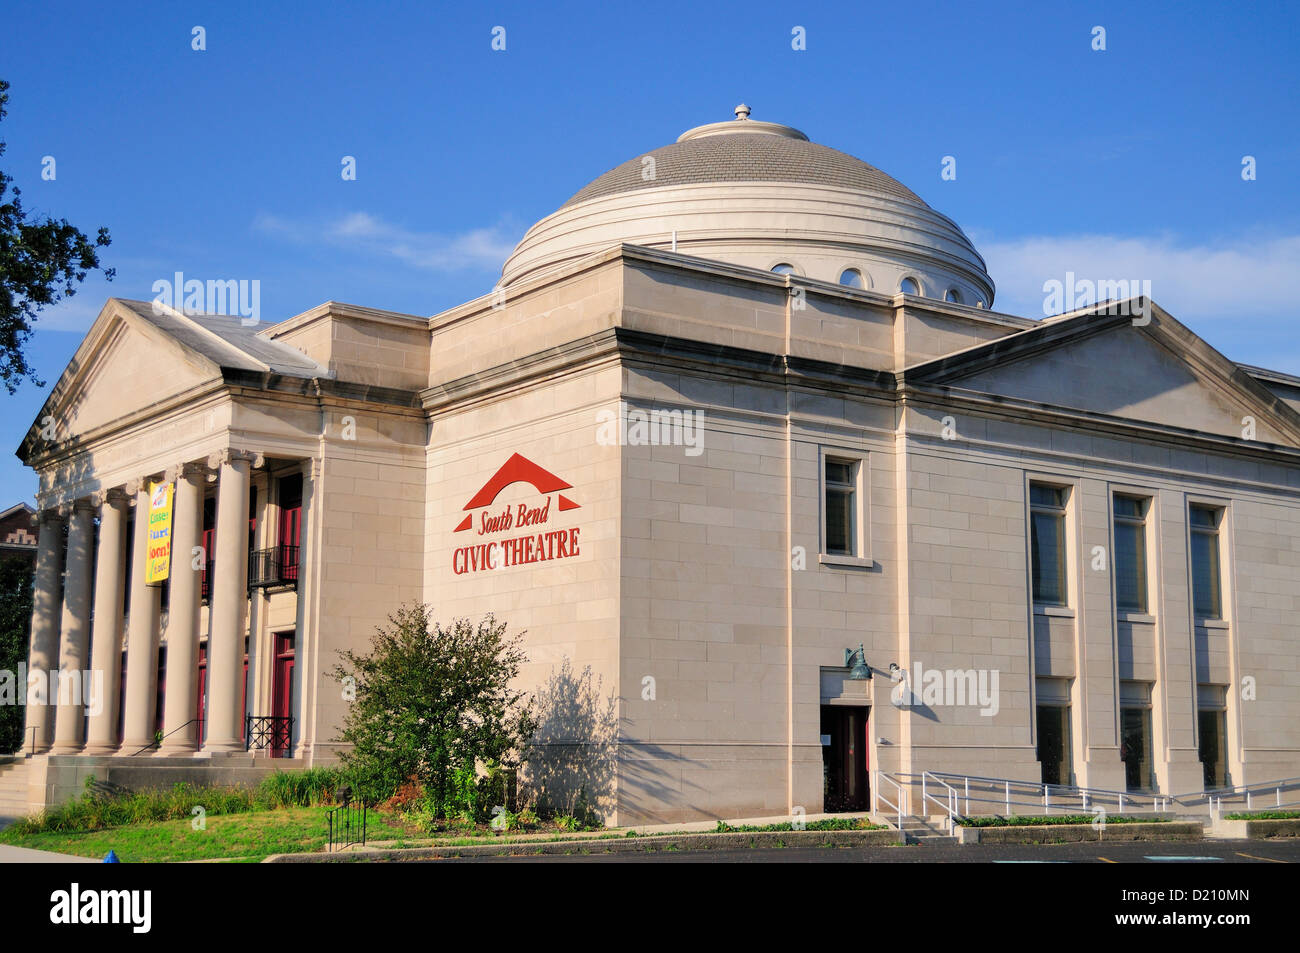 USA Indiana South Bend Civic Theatre. Stock Photo